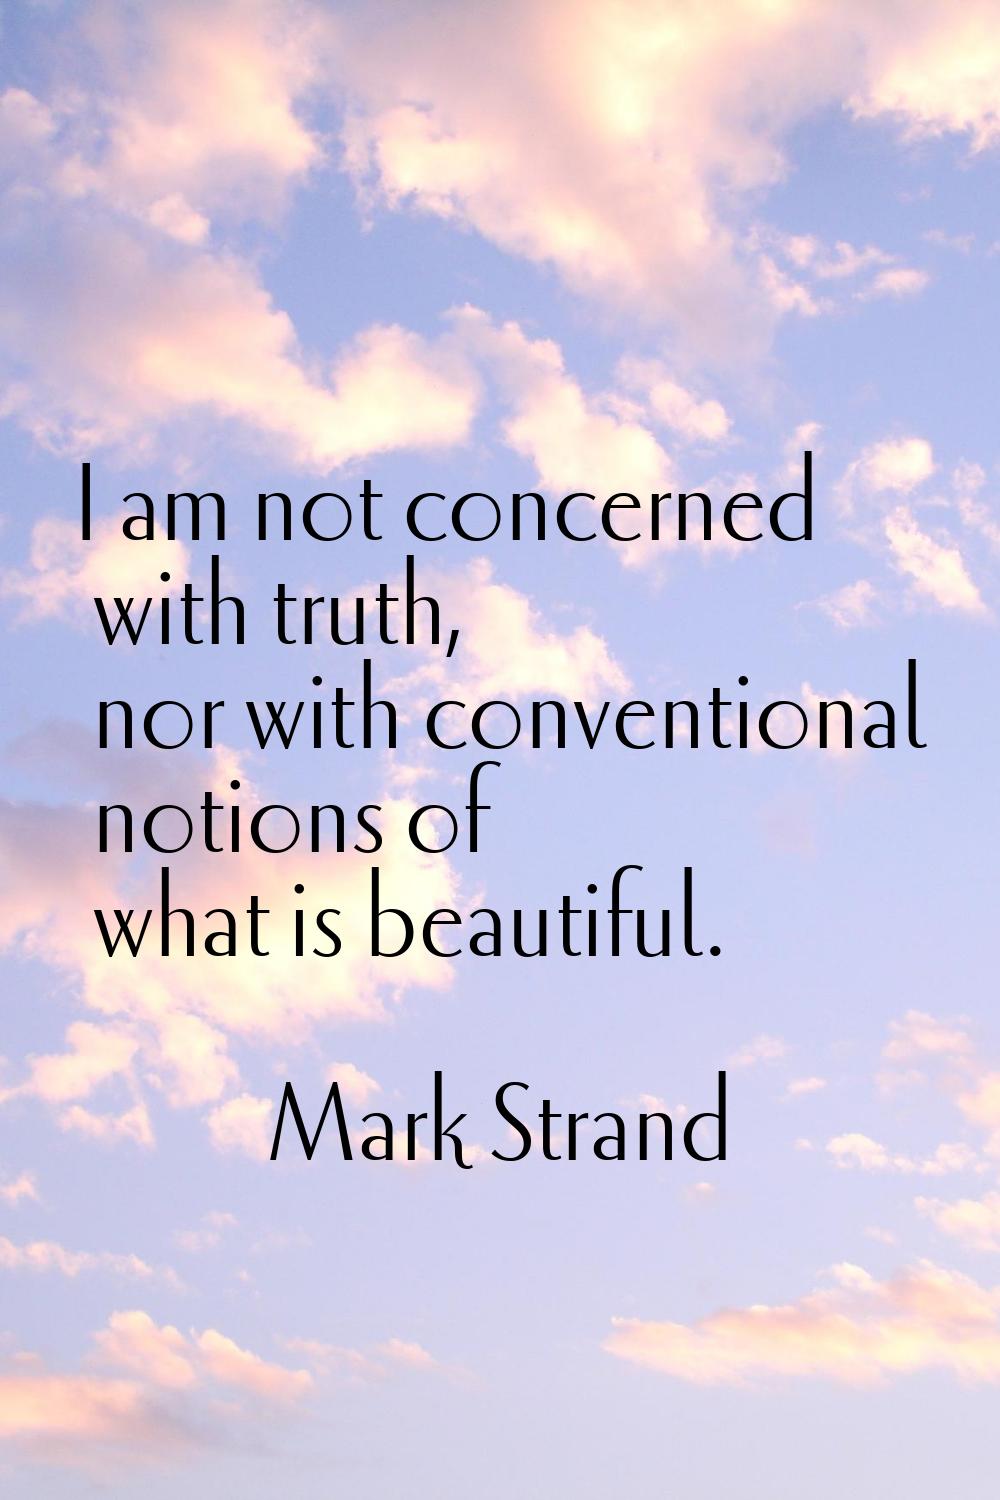 I am not concerned with truth, nor with conventional notions of what is beautiful.